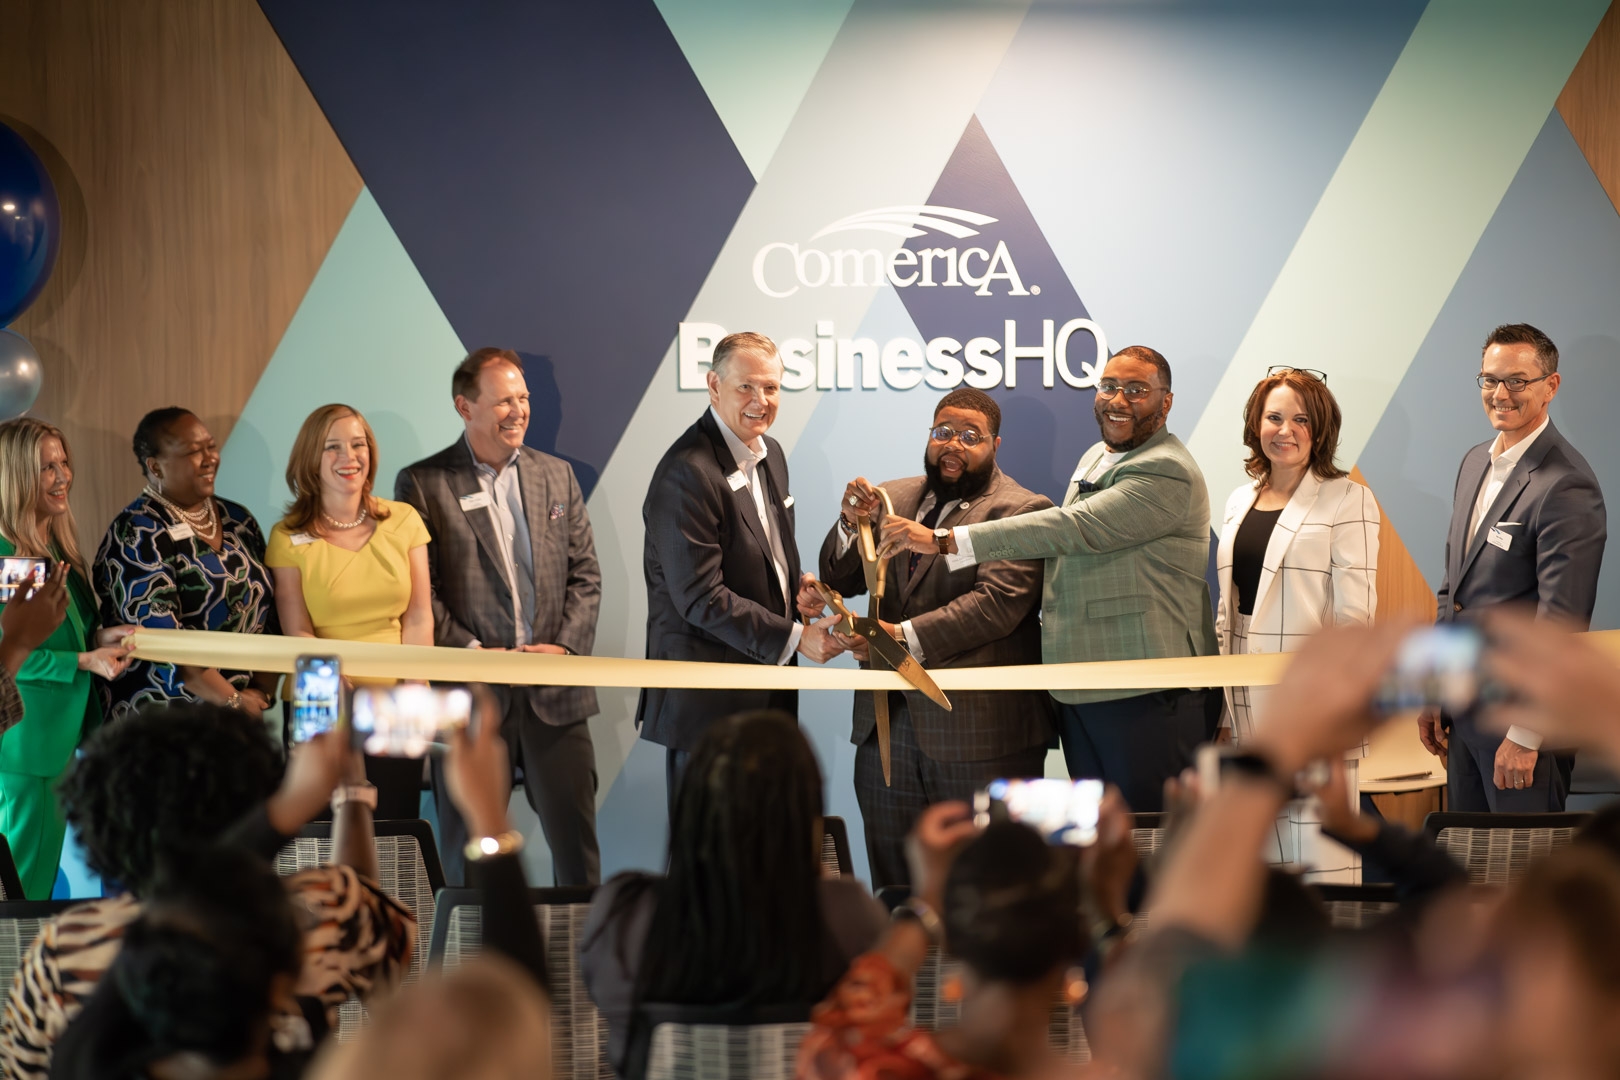 Comerica BusinessHQ Ribbon Cutting-image (3).png